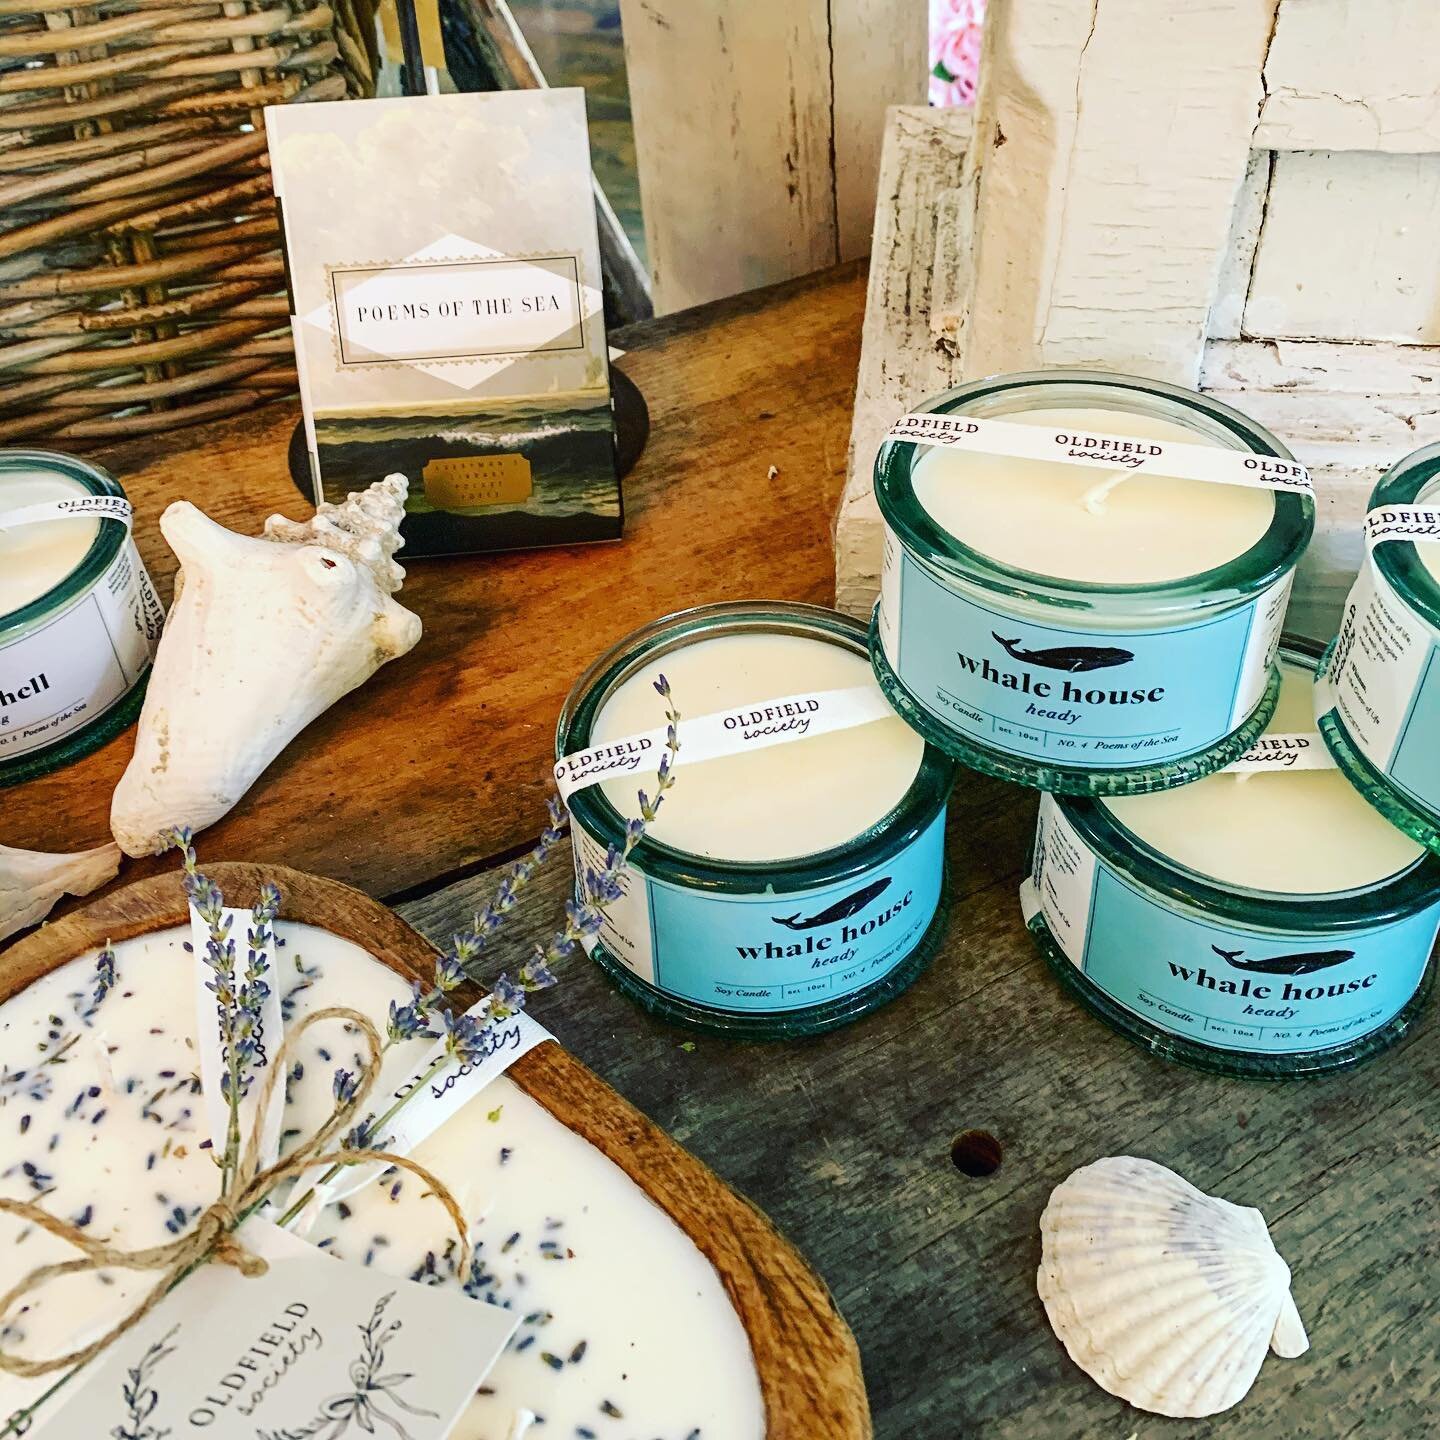 ⚓️🌊 &ldquo;The sea is calling, and I must go.&rdquo; Only 3 days until our online launch for Oldfield Society&rsquo;s newest candle collection &ldquo;Poems of the Sea.&rdquo; Five amazing fragrances inspired by five amazing poems...stay tuned for th